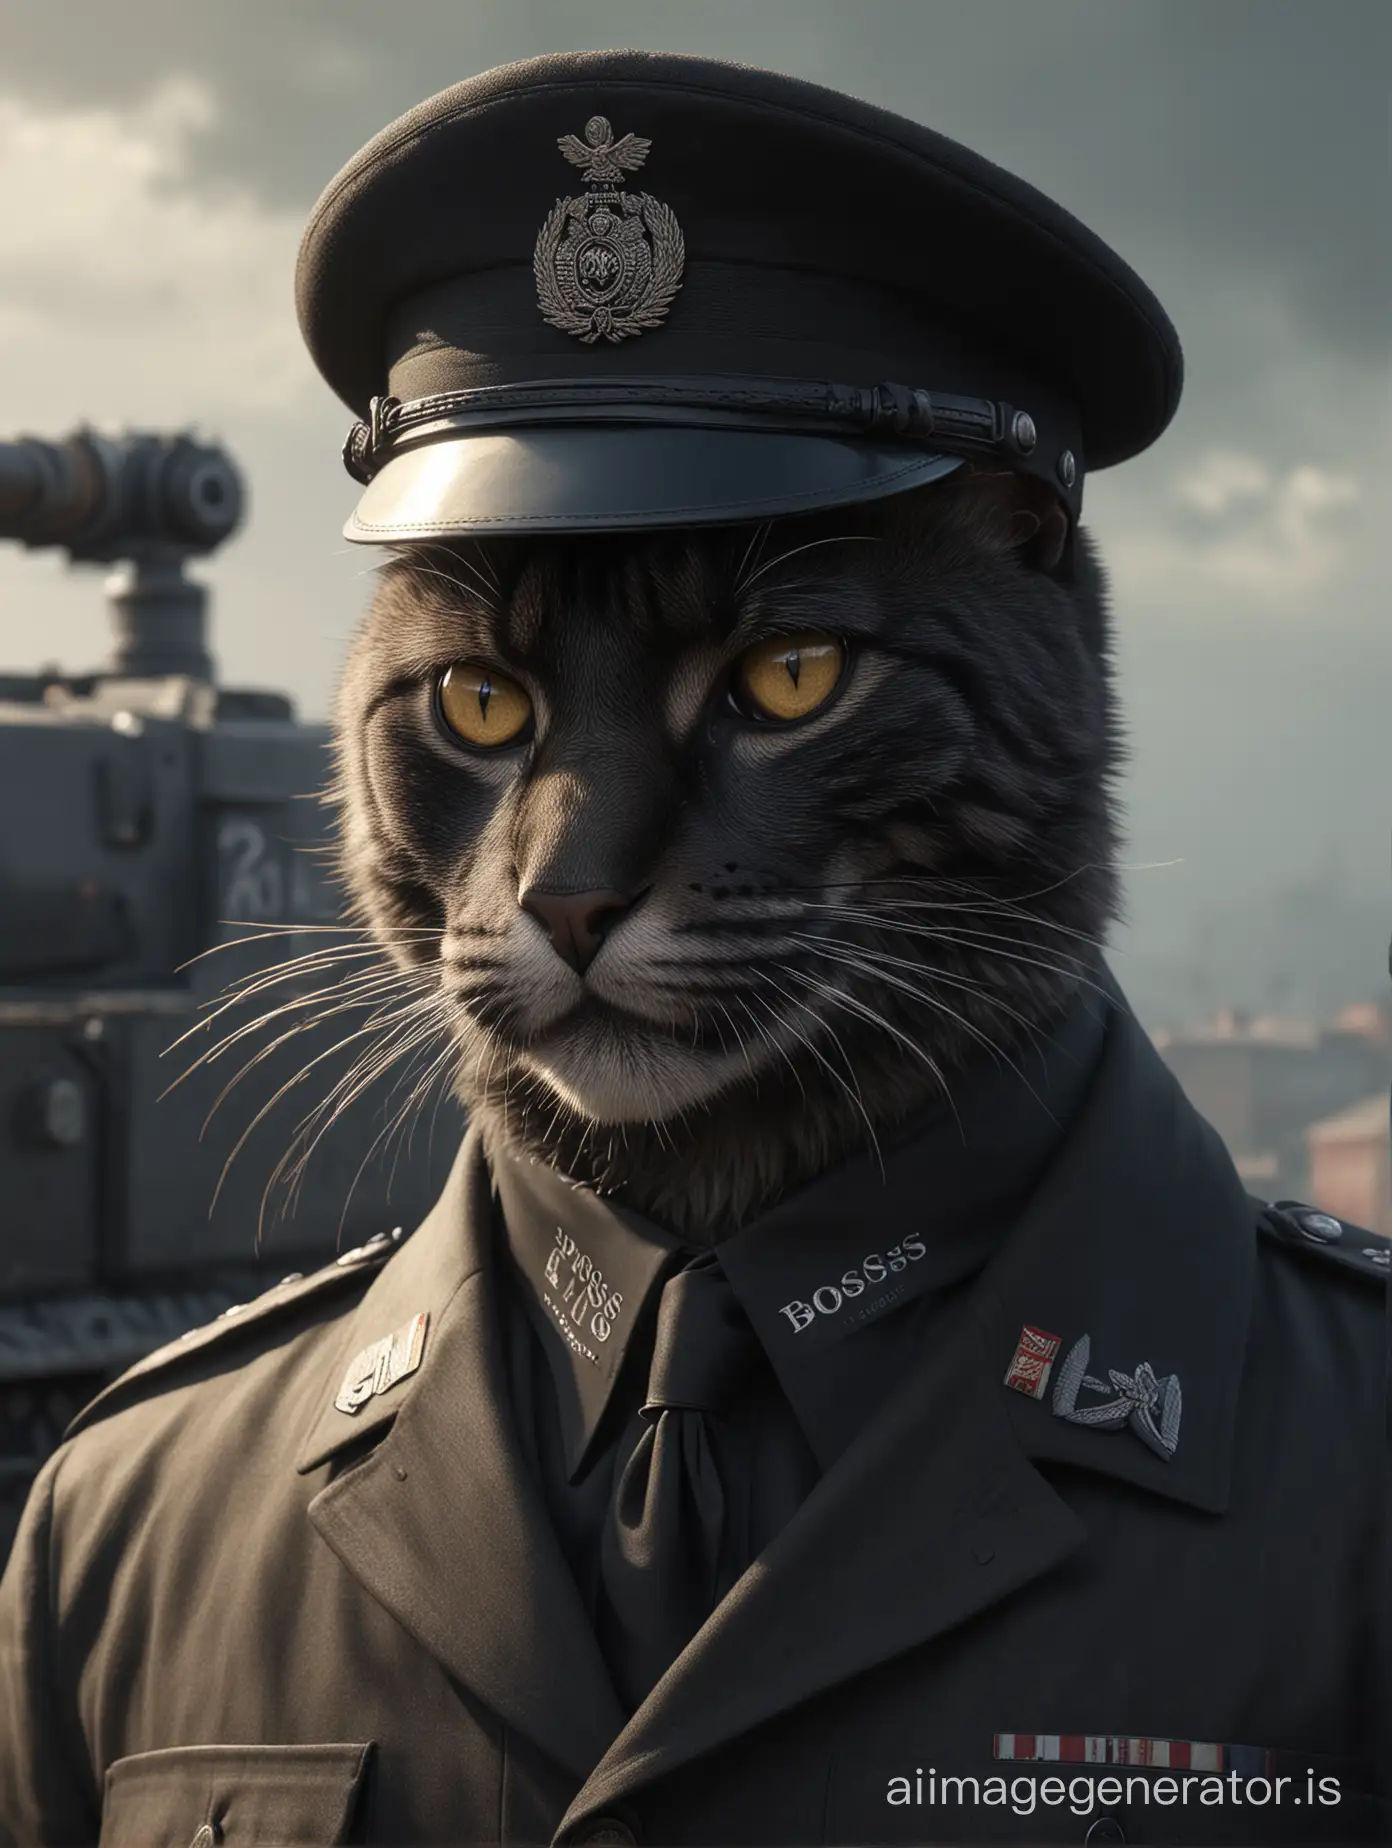 German-Officer-Black-Cat-in-1940s-Style-with-Tiger-Tank-4K-UltraResolution-Realistic-Image